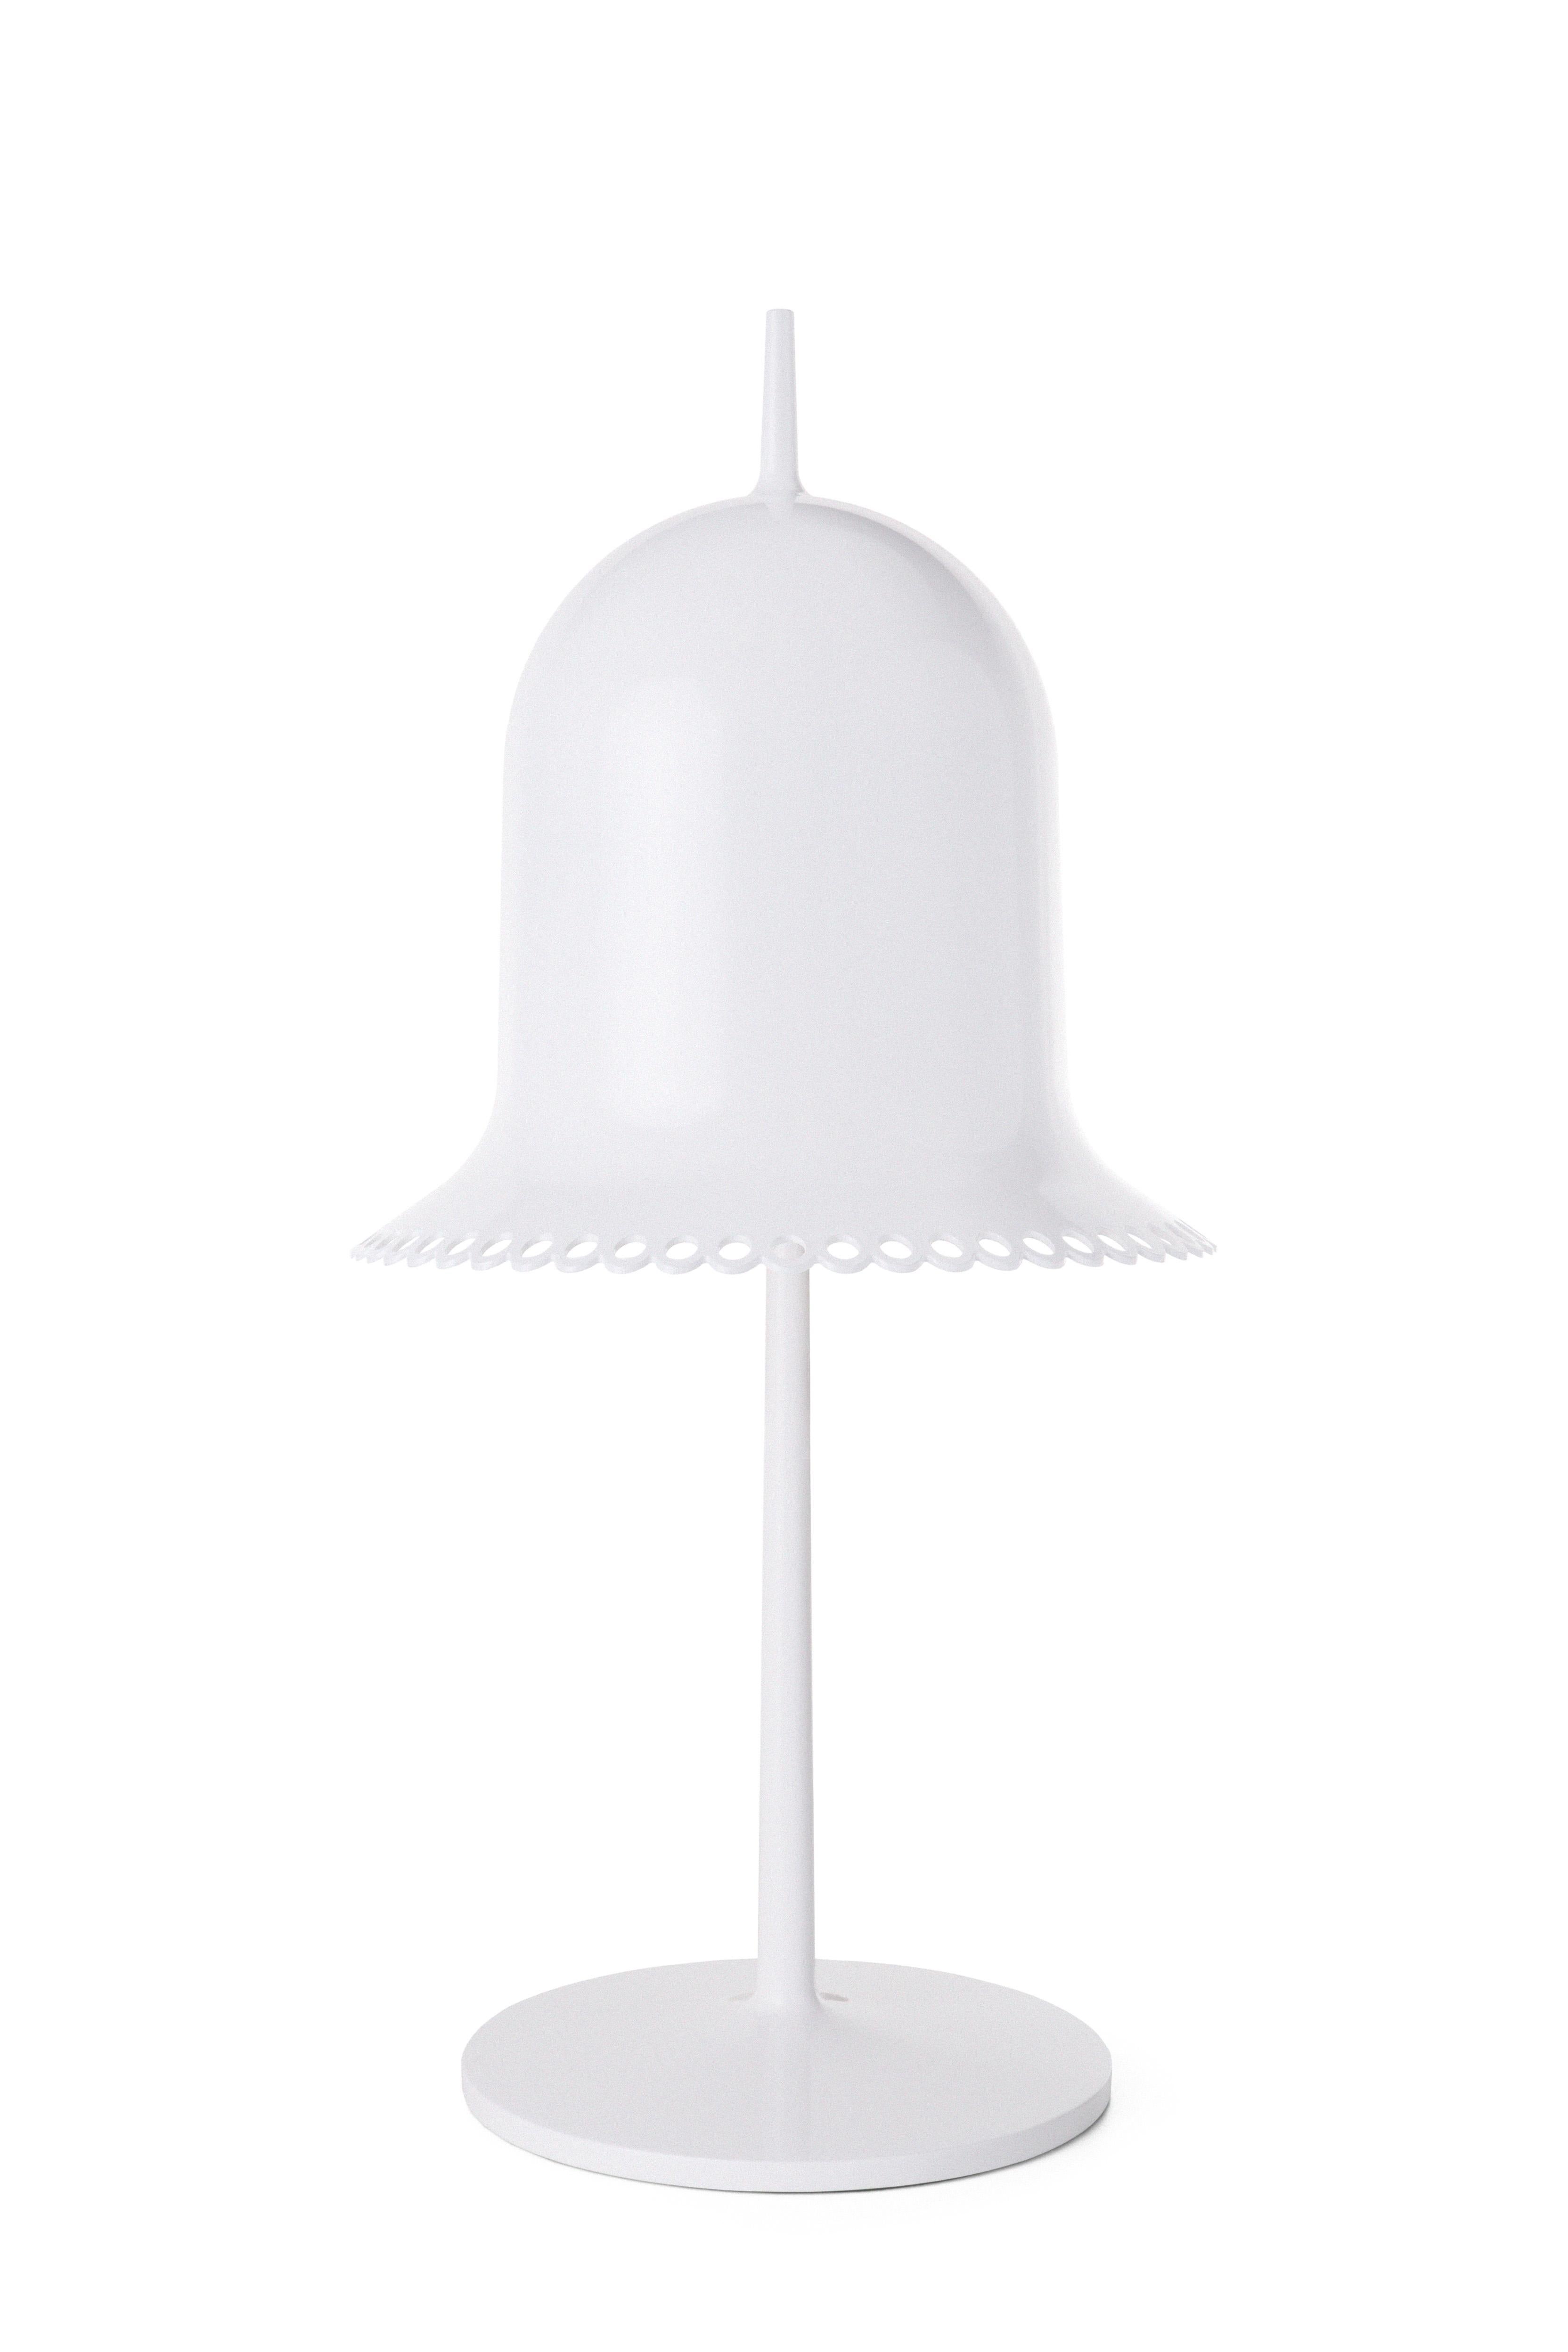 Moooi Lolita Table Lamp in Pink Lacquered Plastic by Nika Zupanc For Sale 3